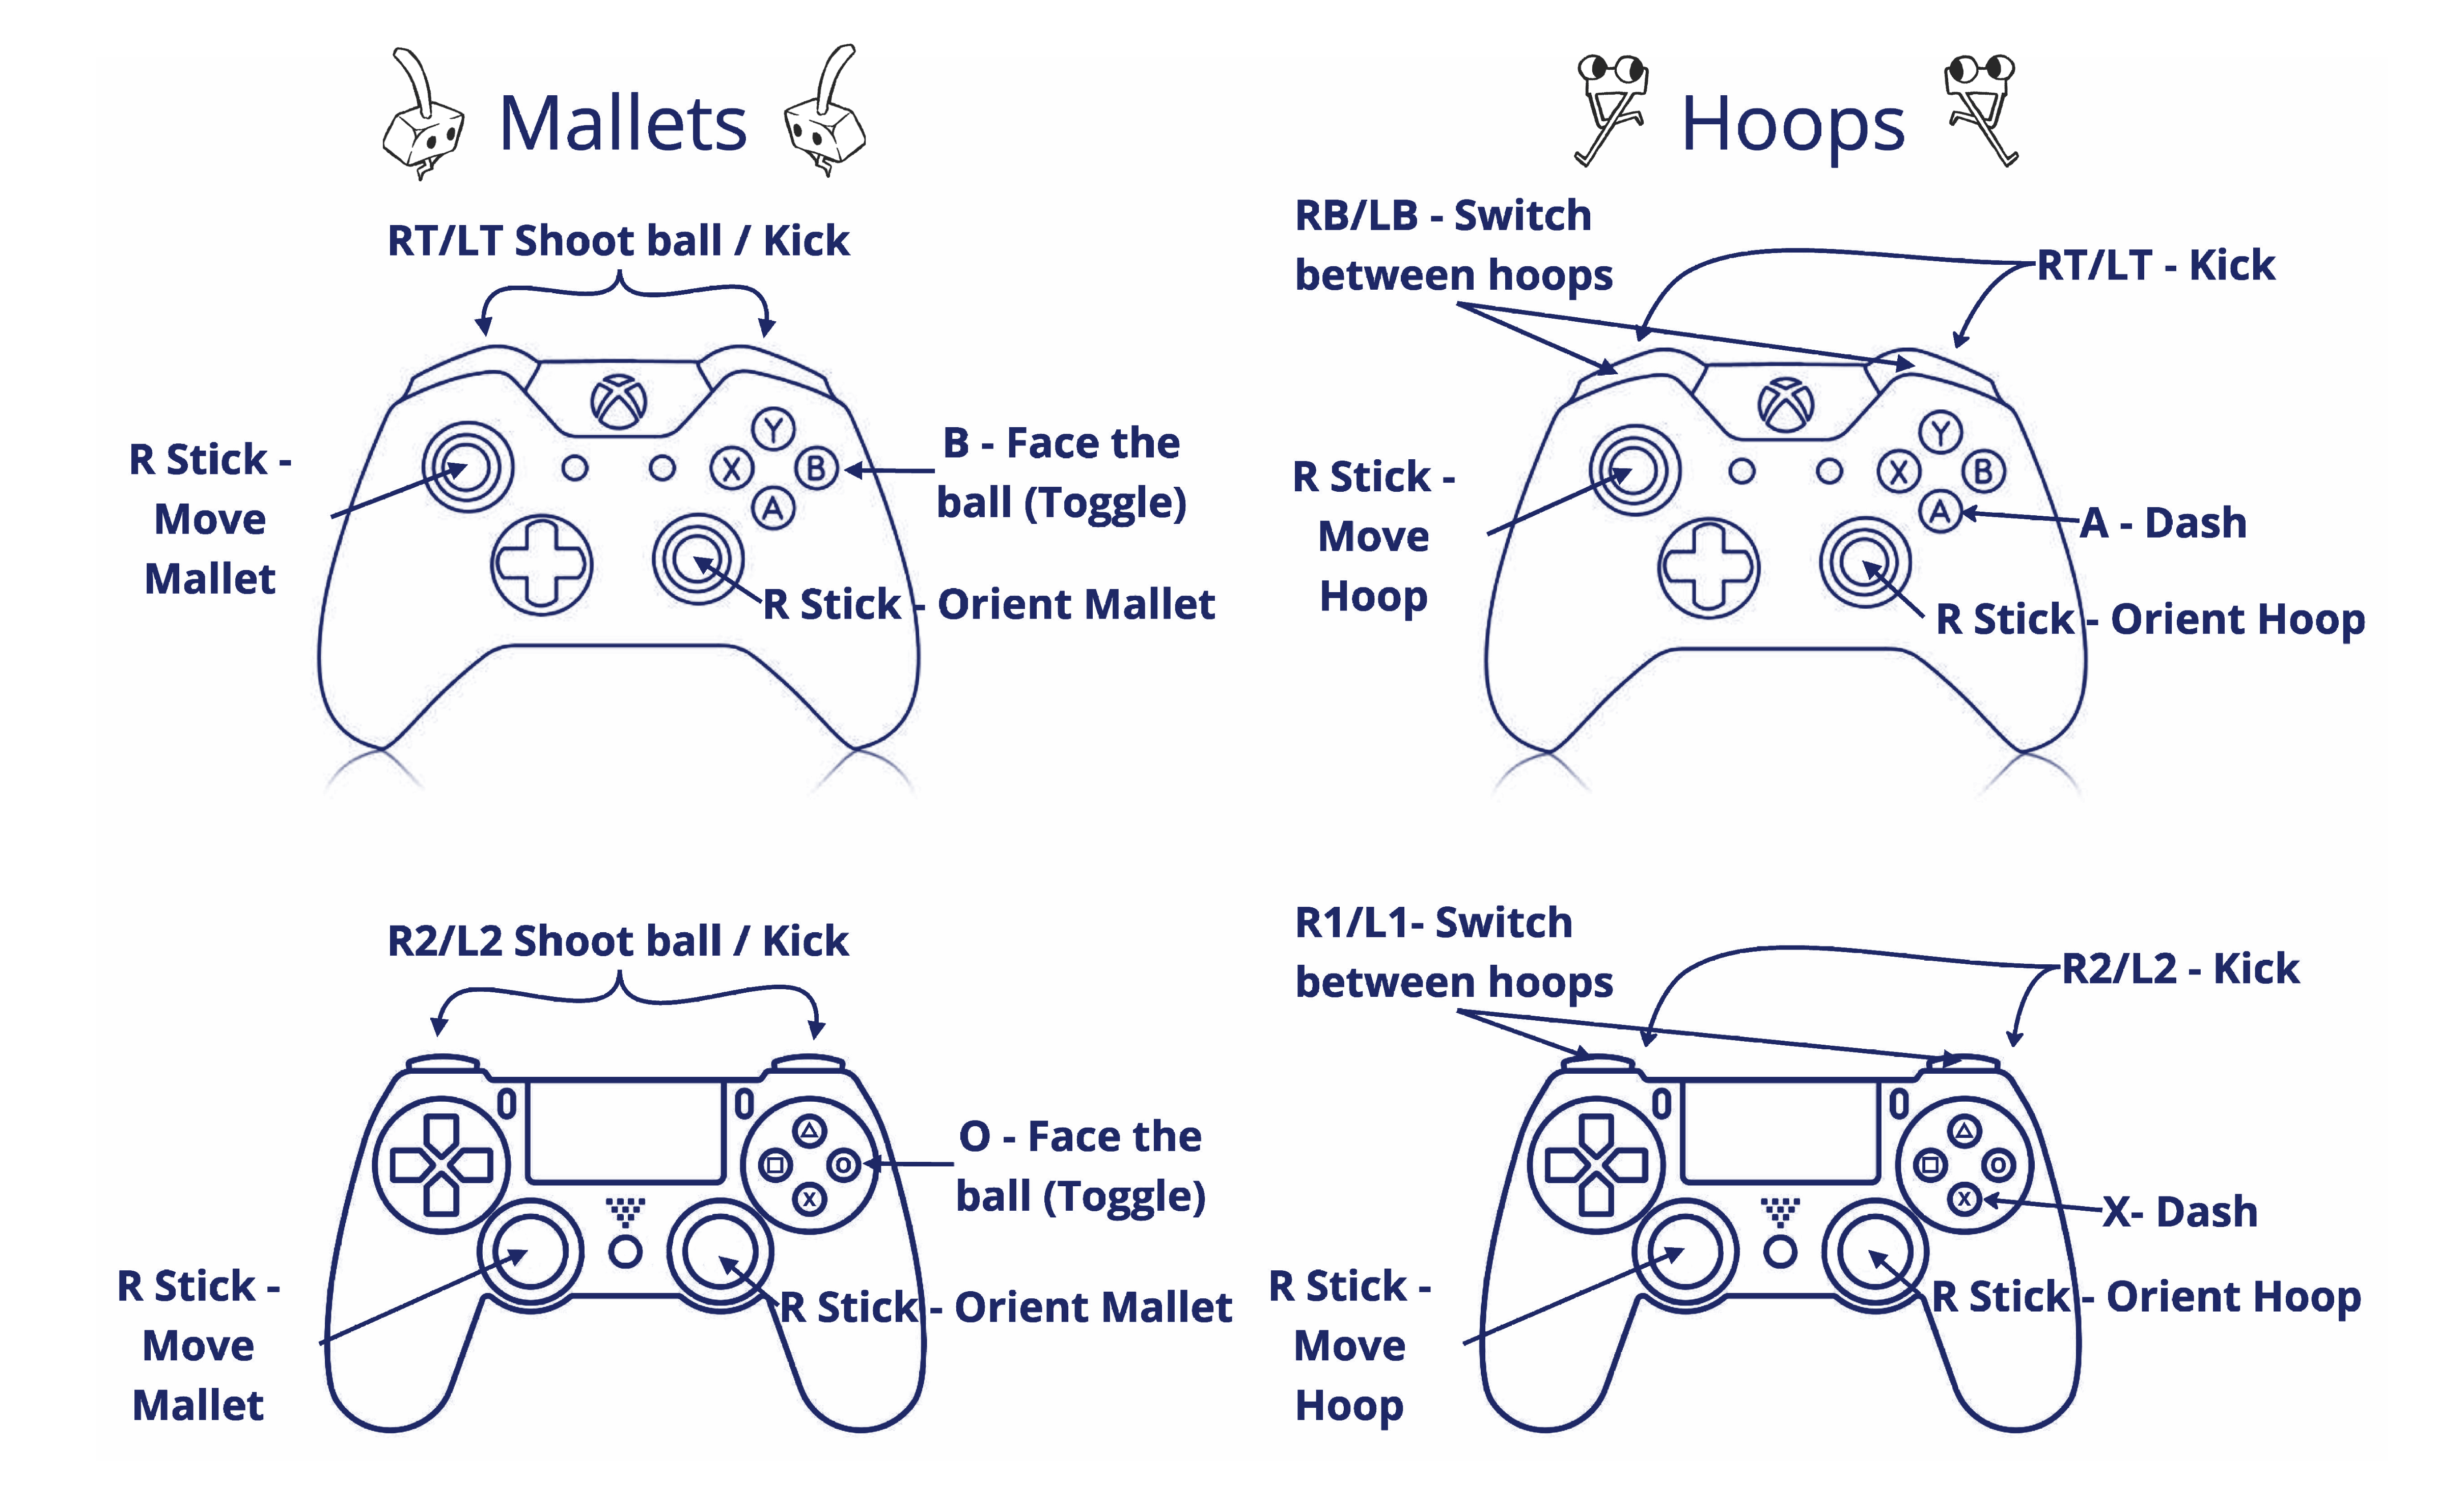 Controls Mapping